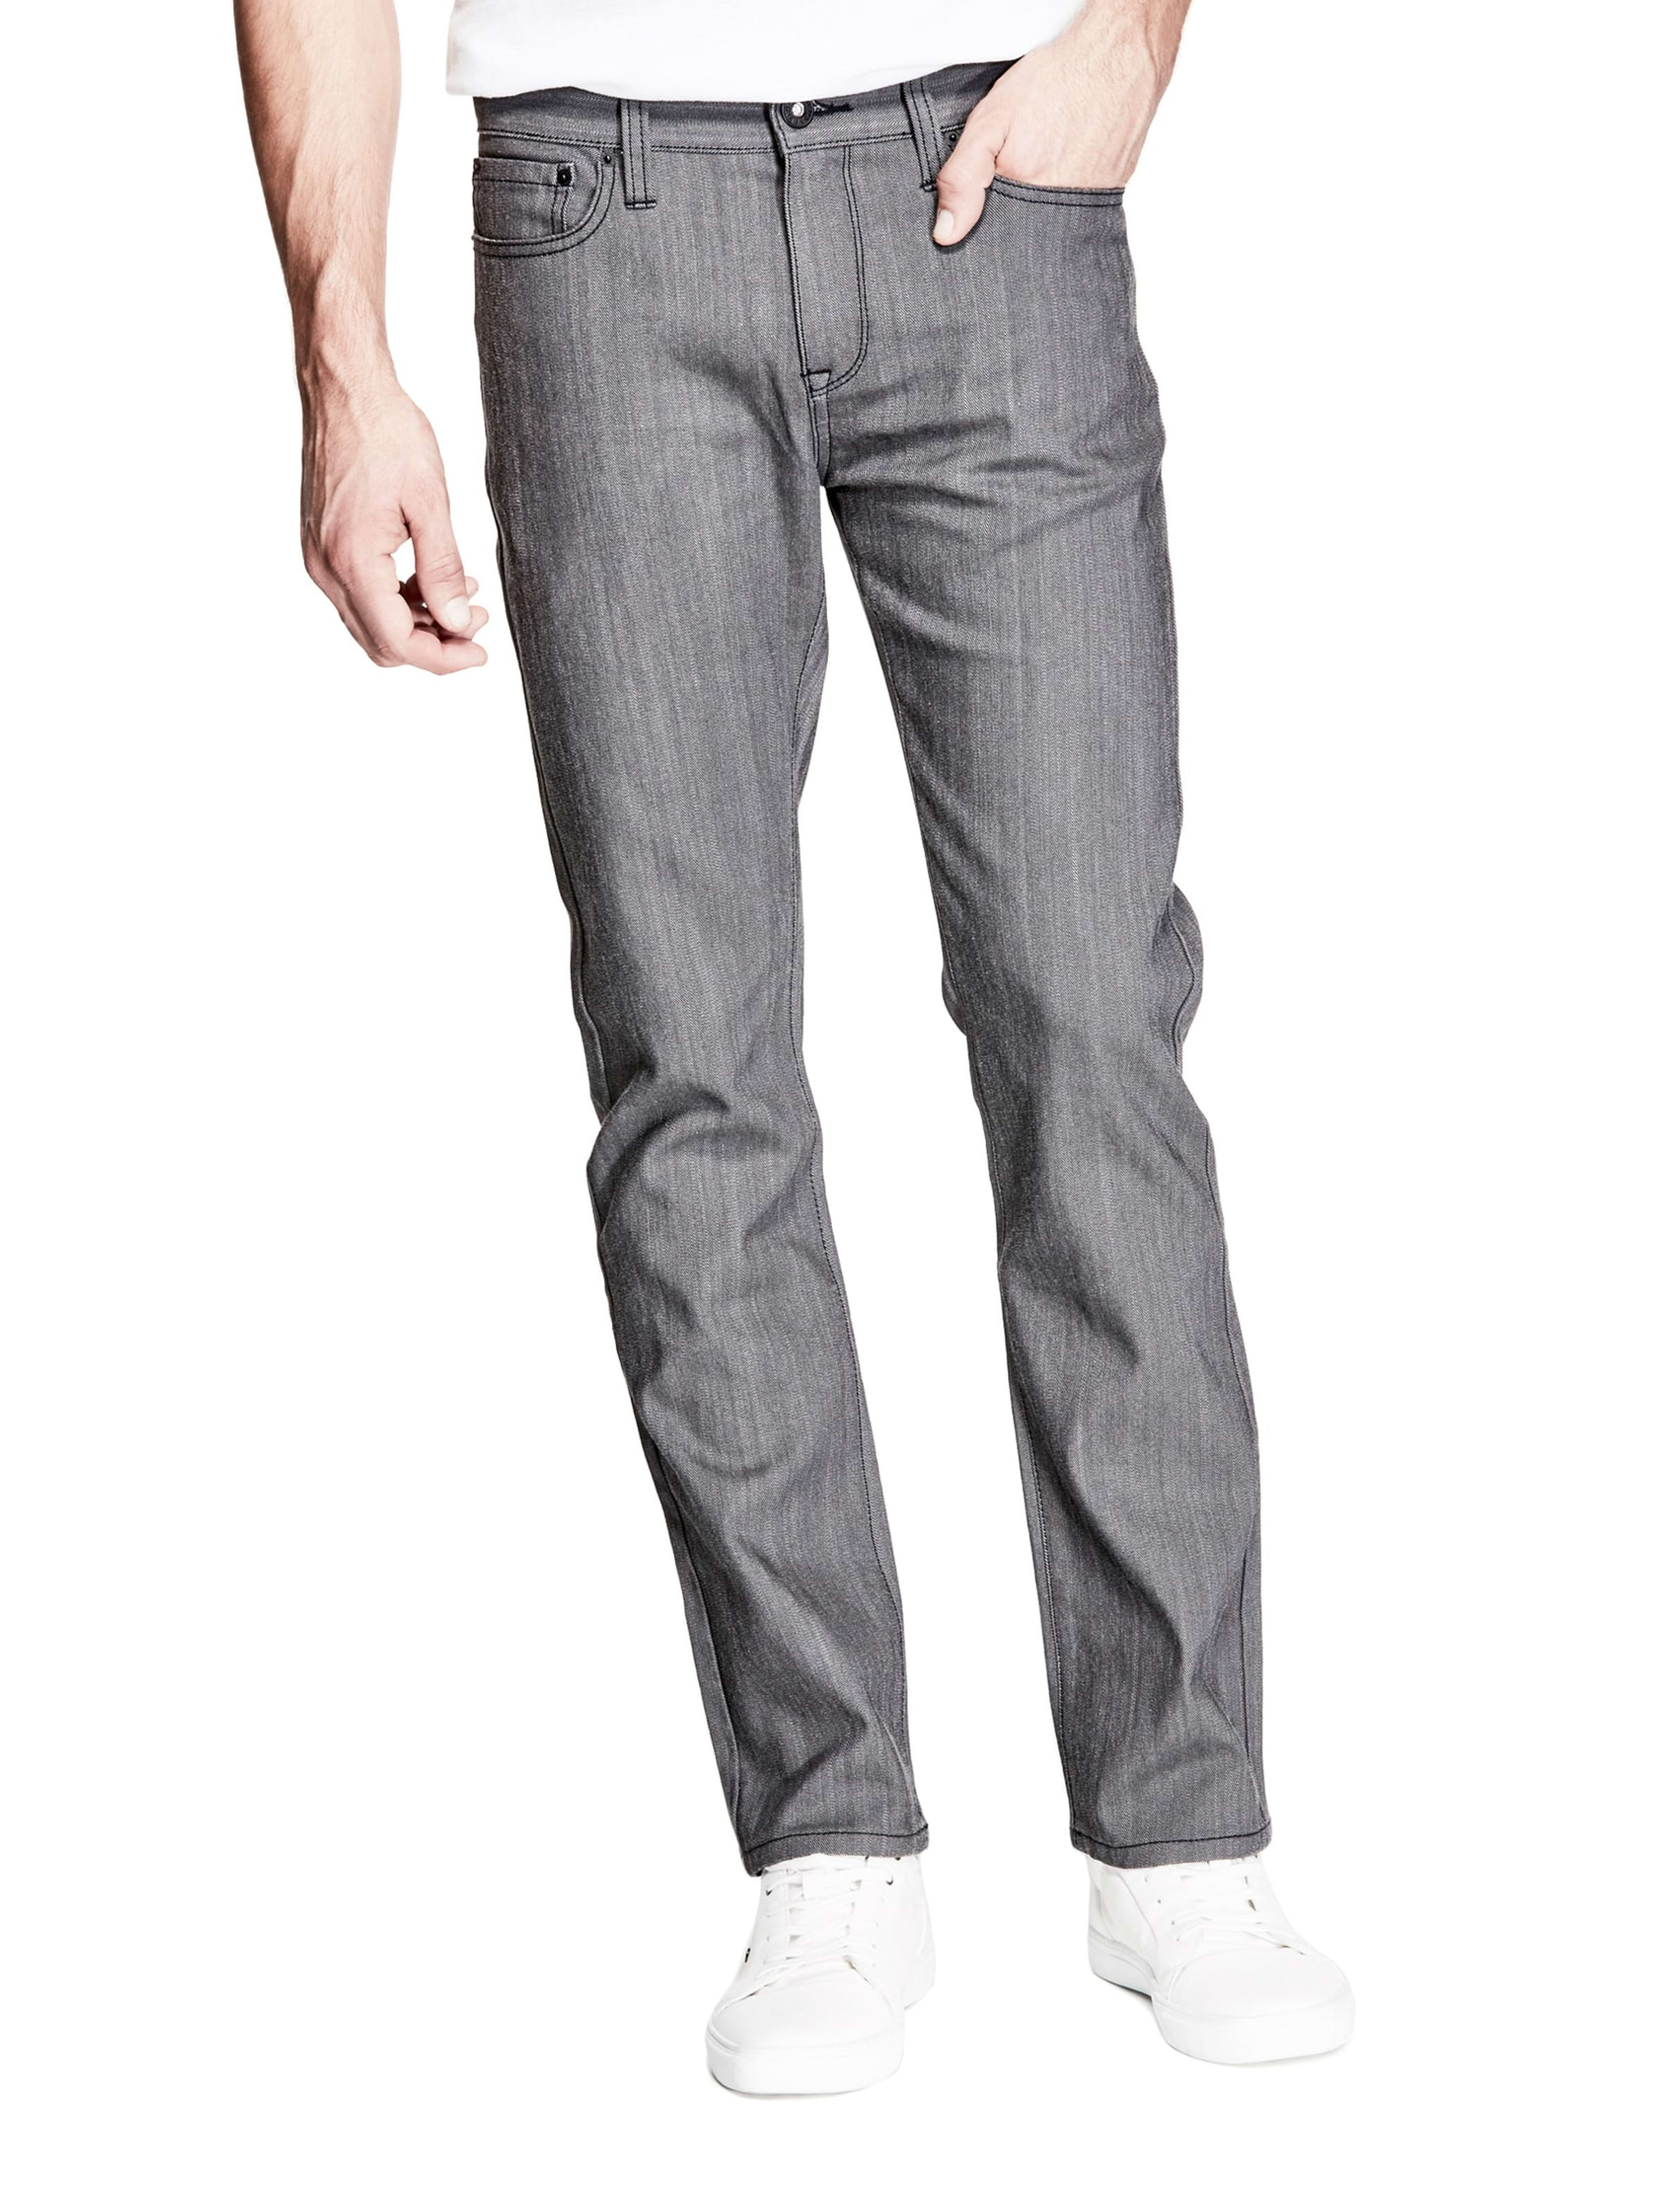 grey guess jeans